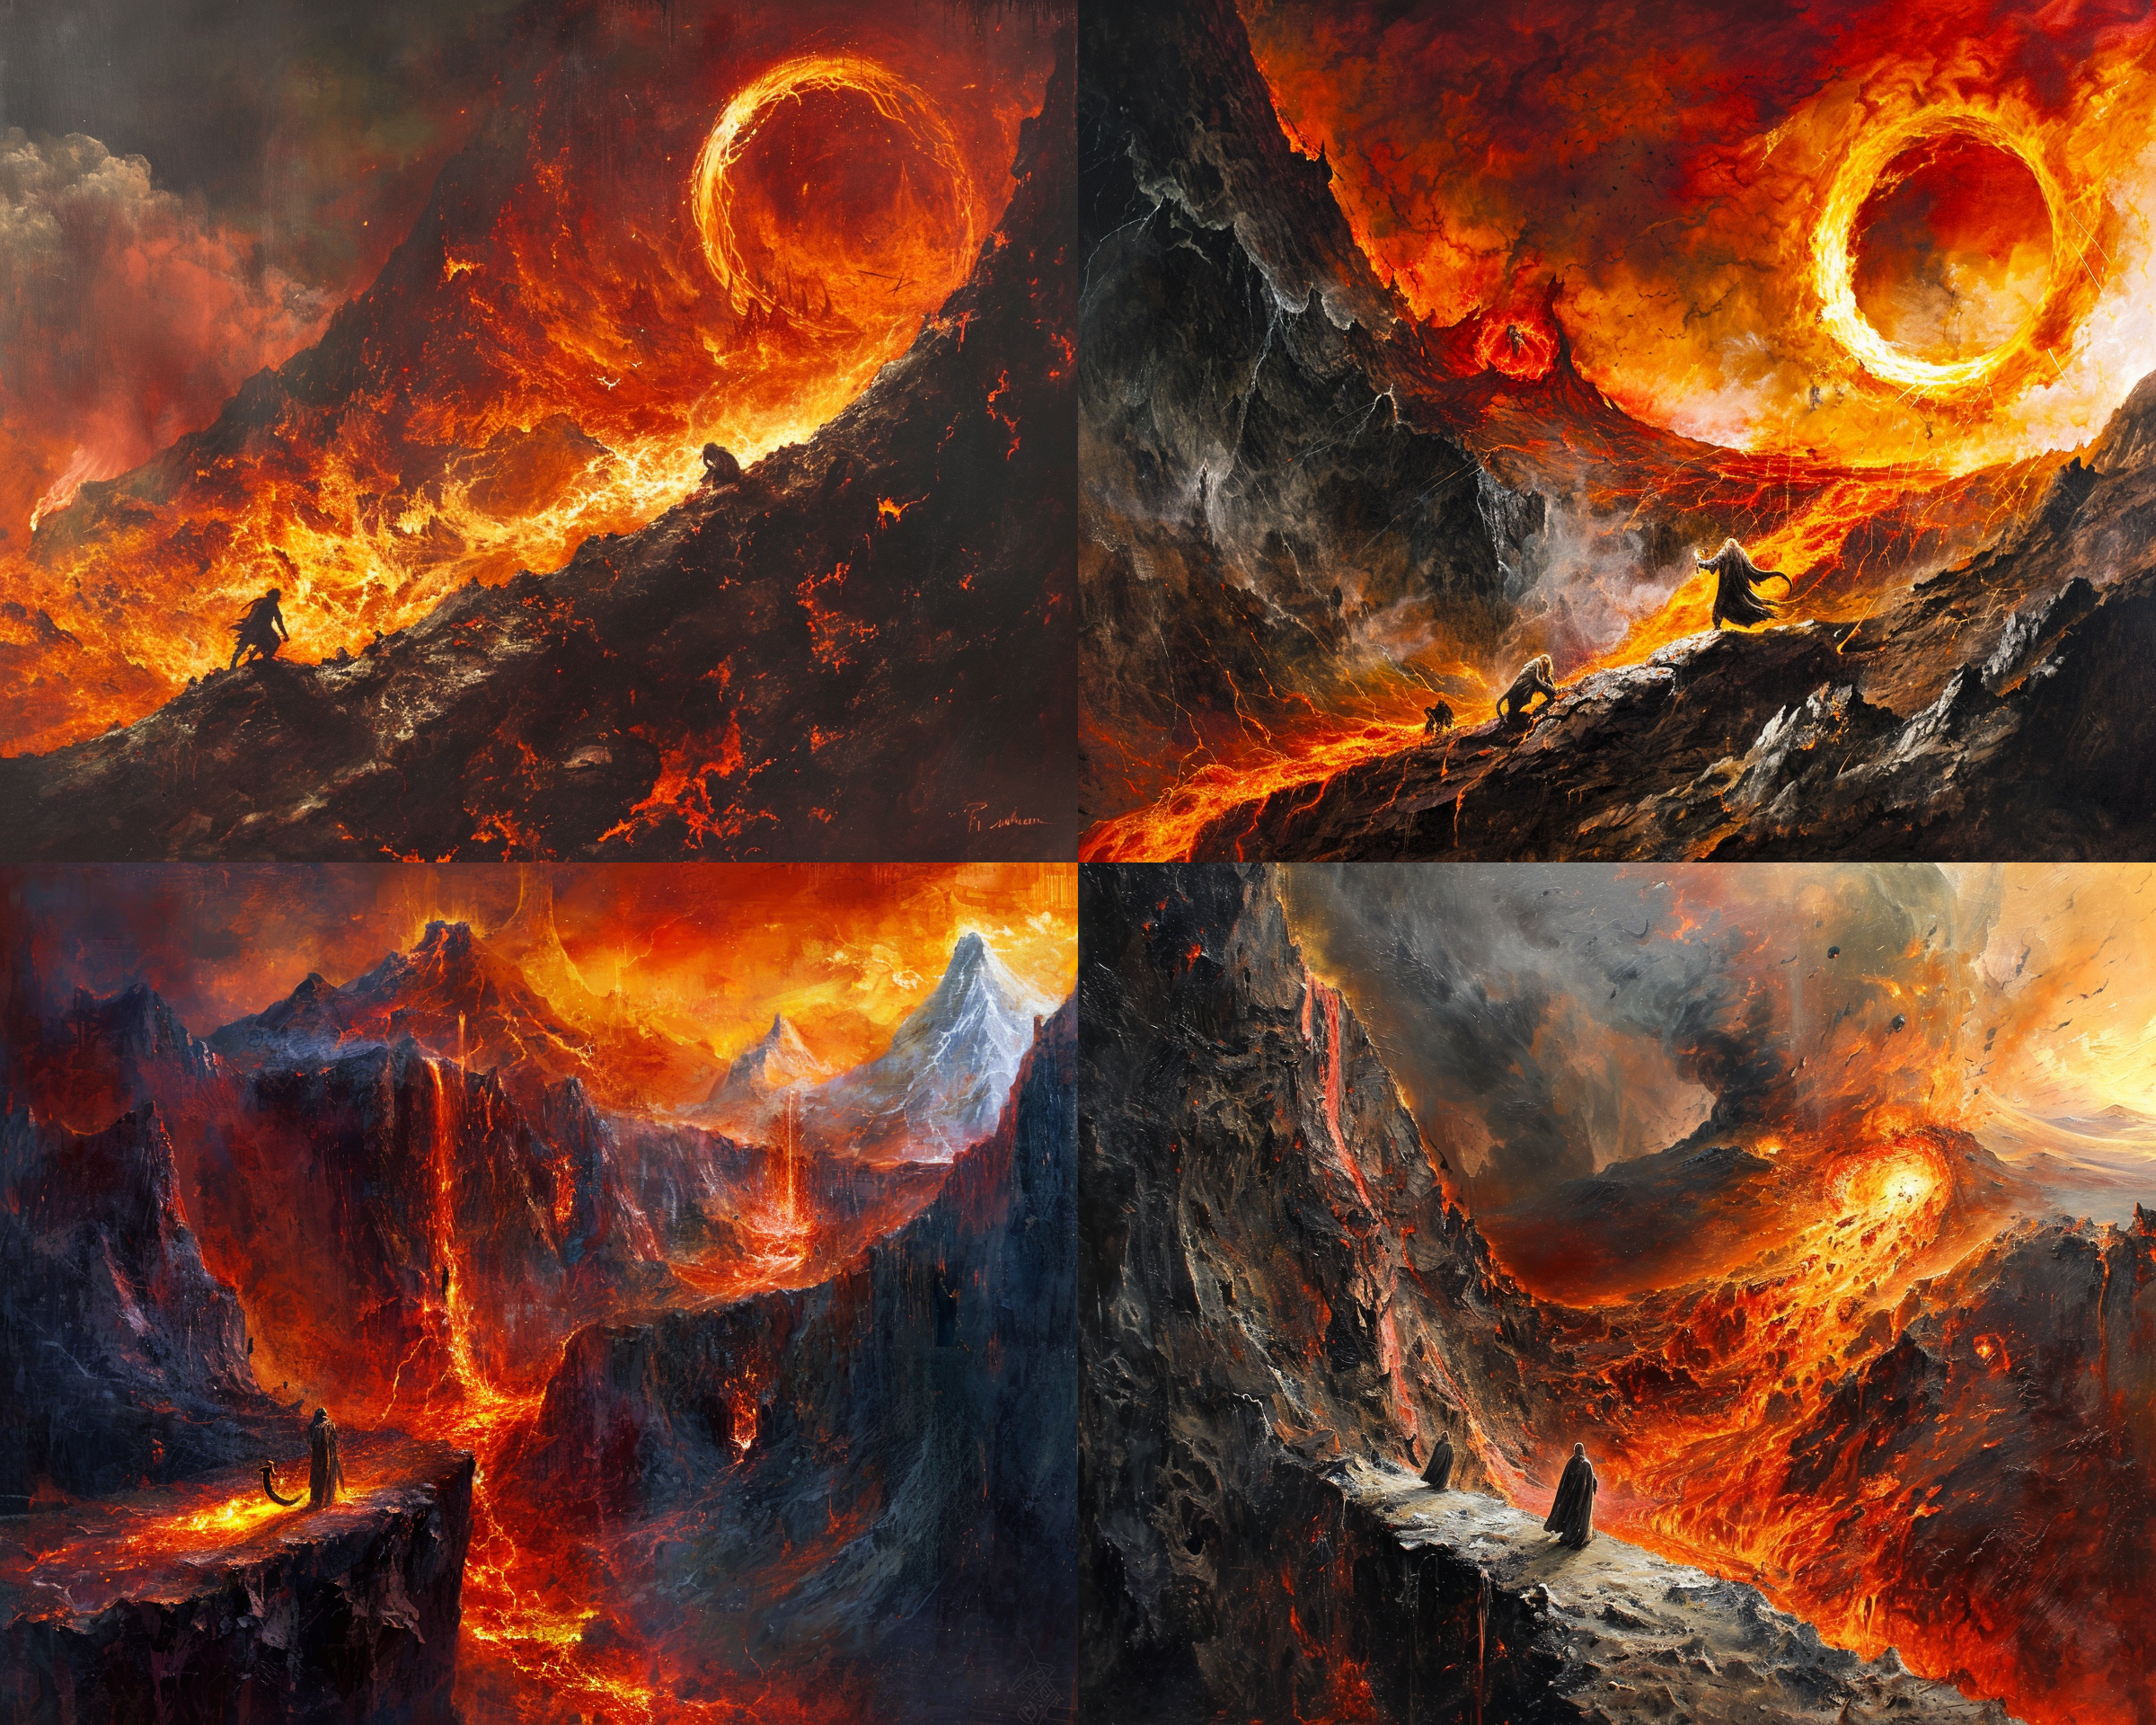 The destruction of the One Ring at Mount Doom